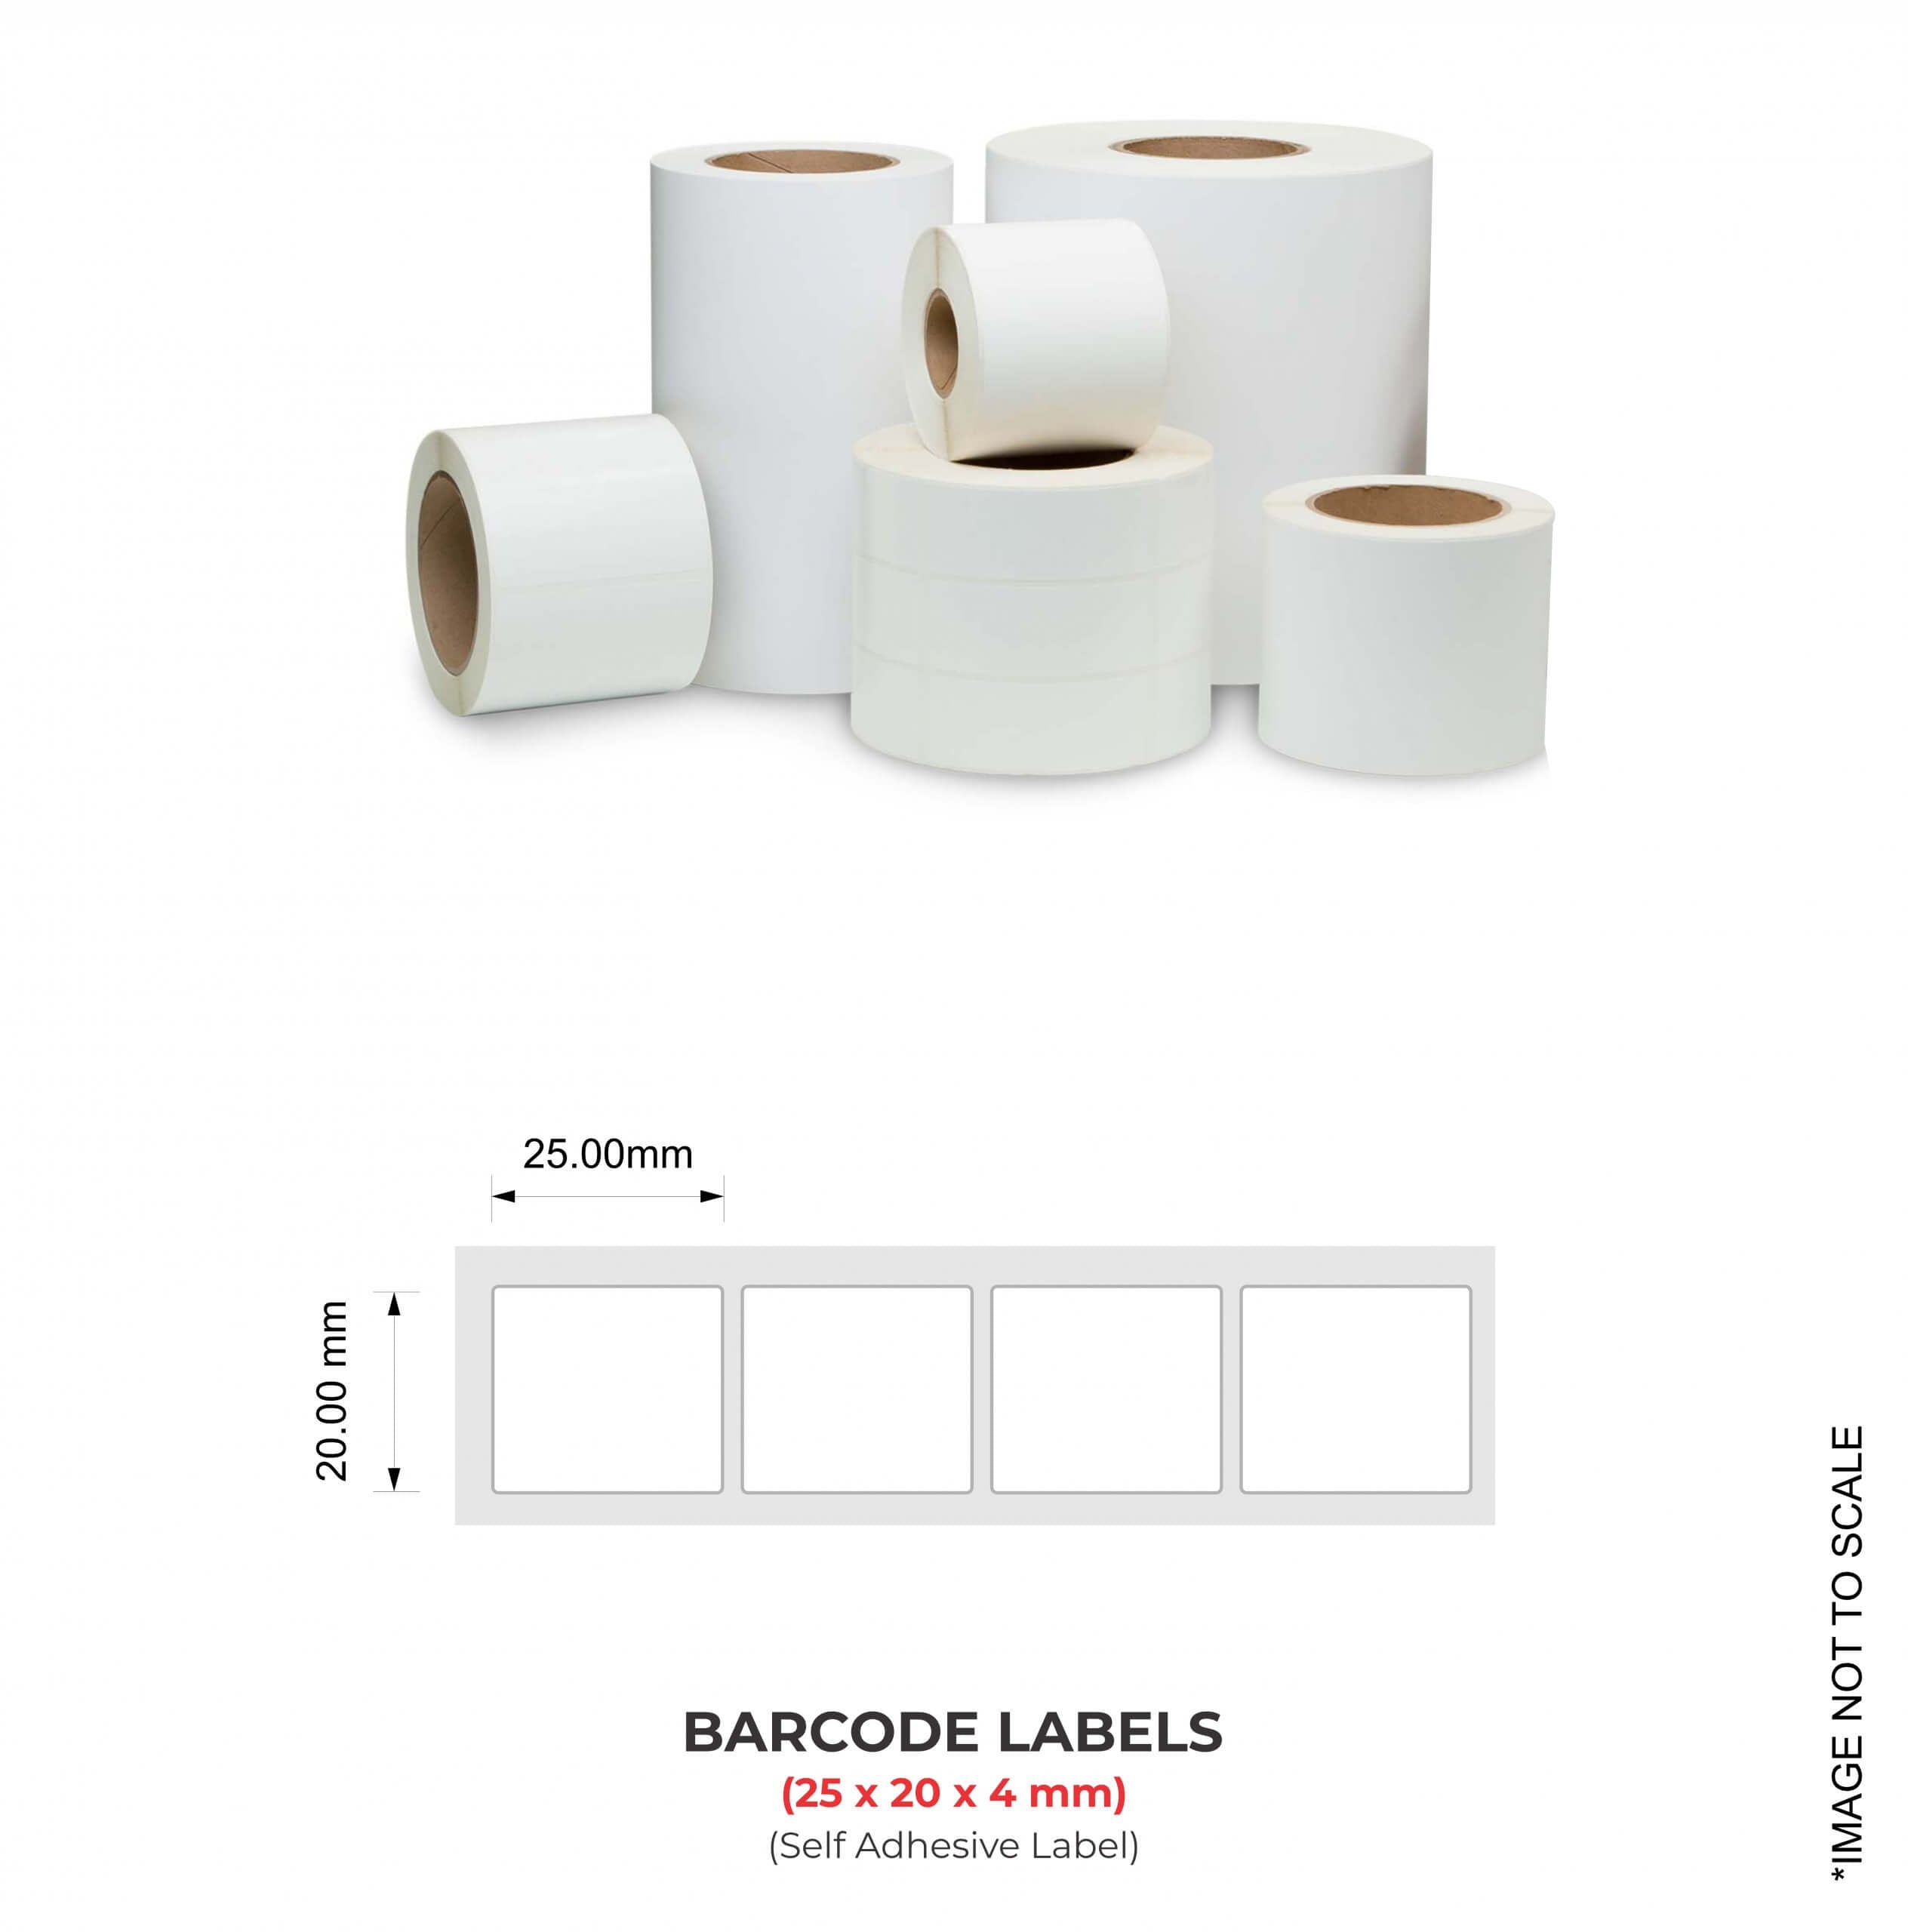 Barcode Labels (25mm x 20mm x 4), 10000 Labels Per Roll (Self Adhesive Label)